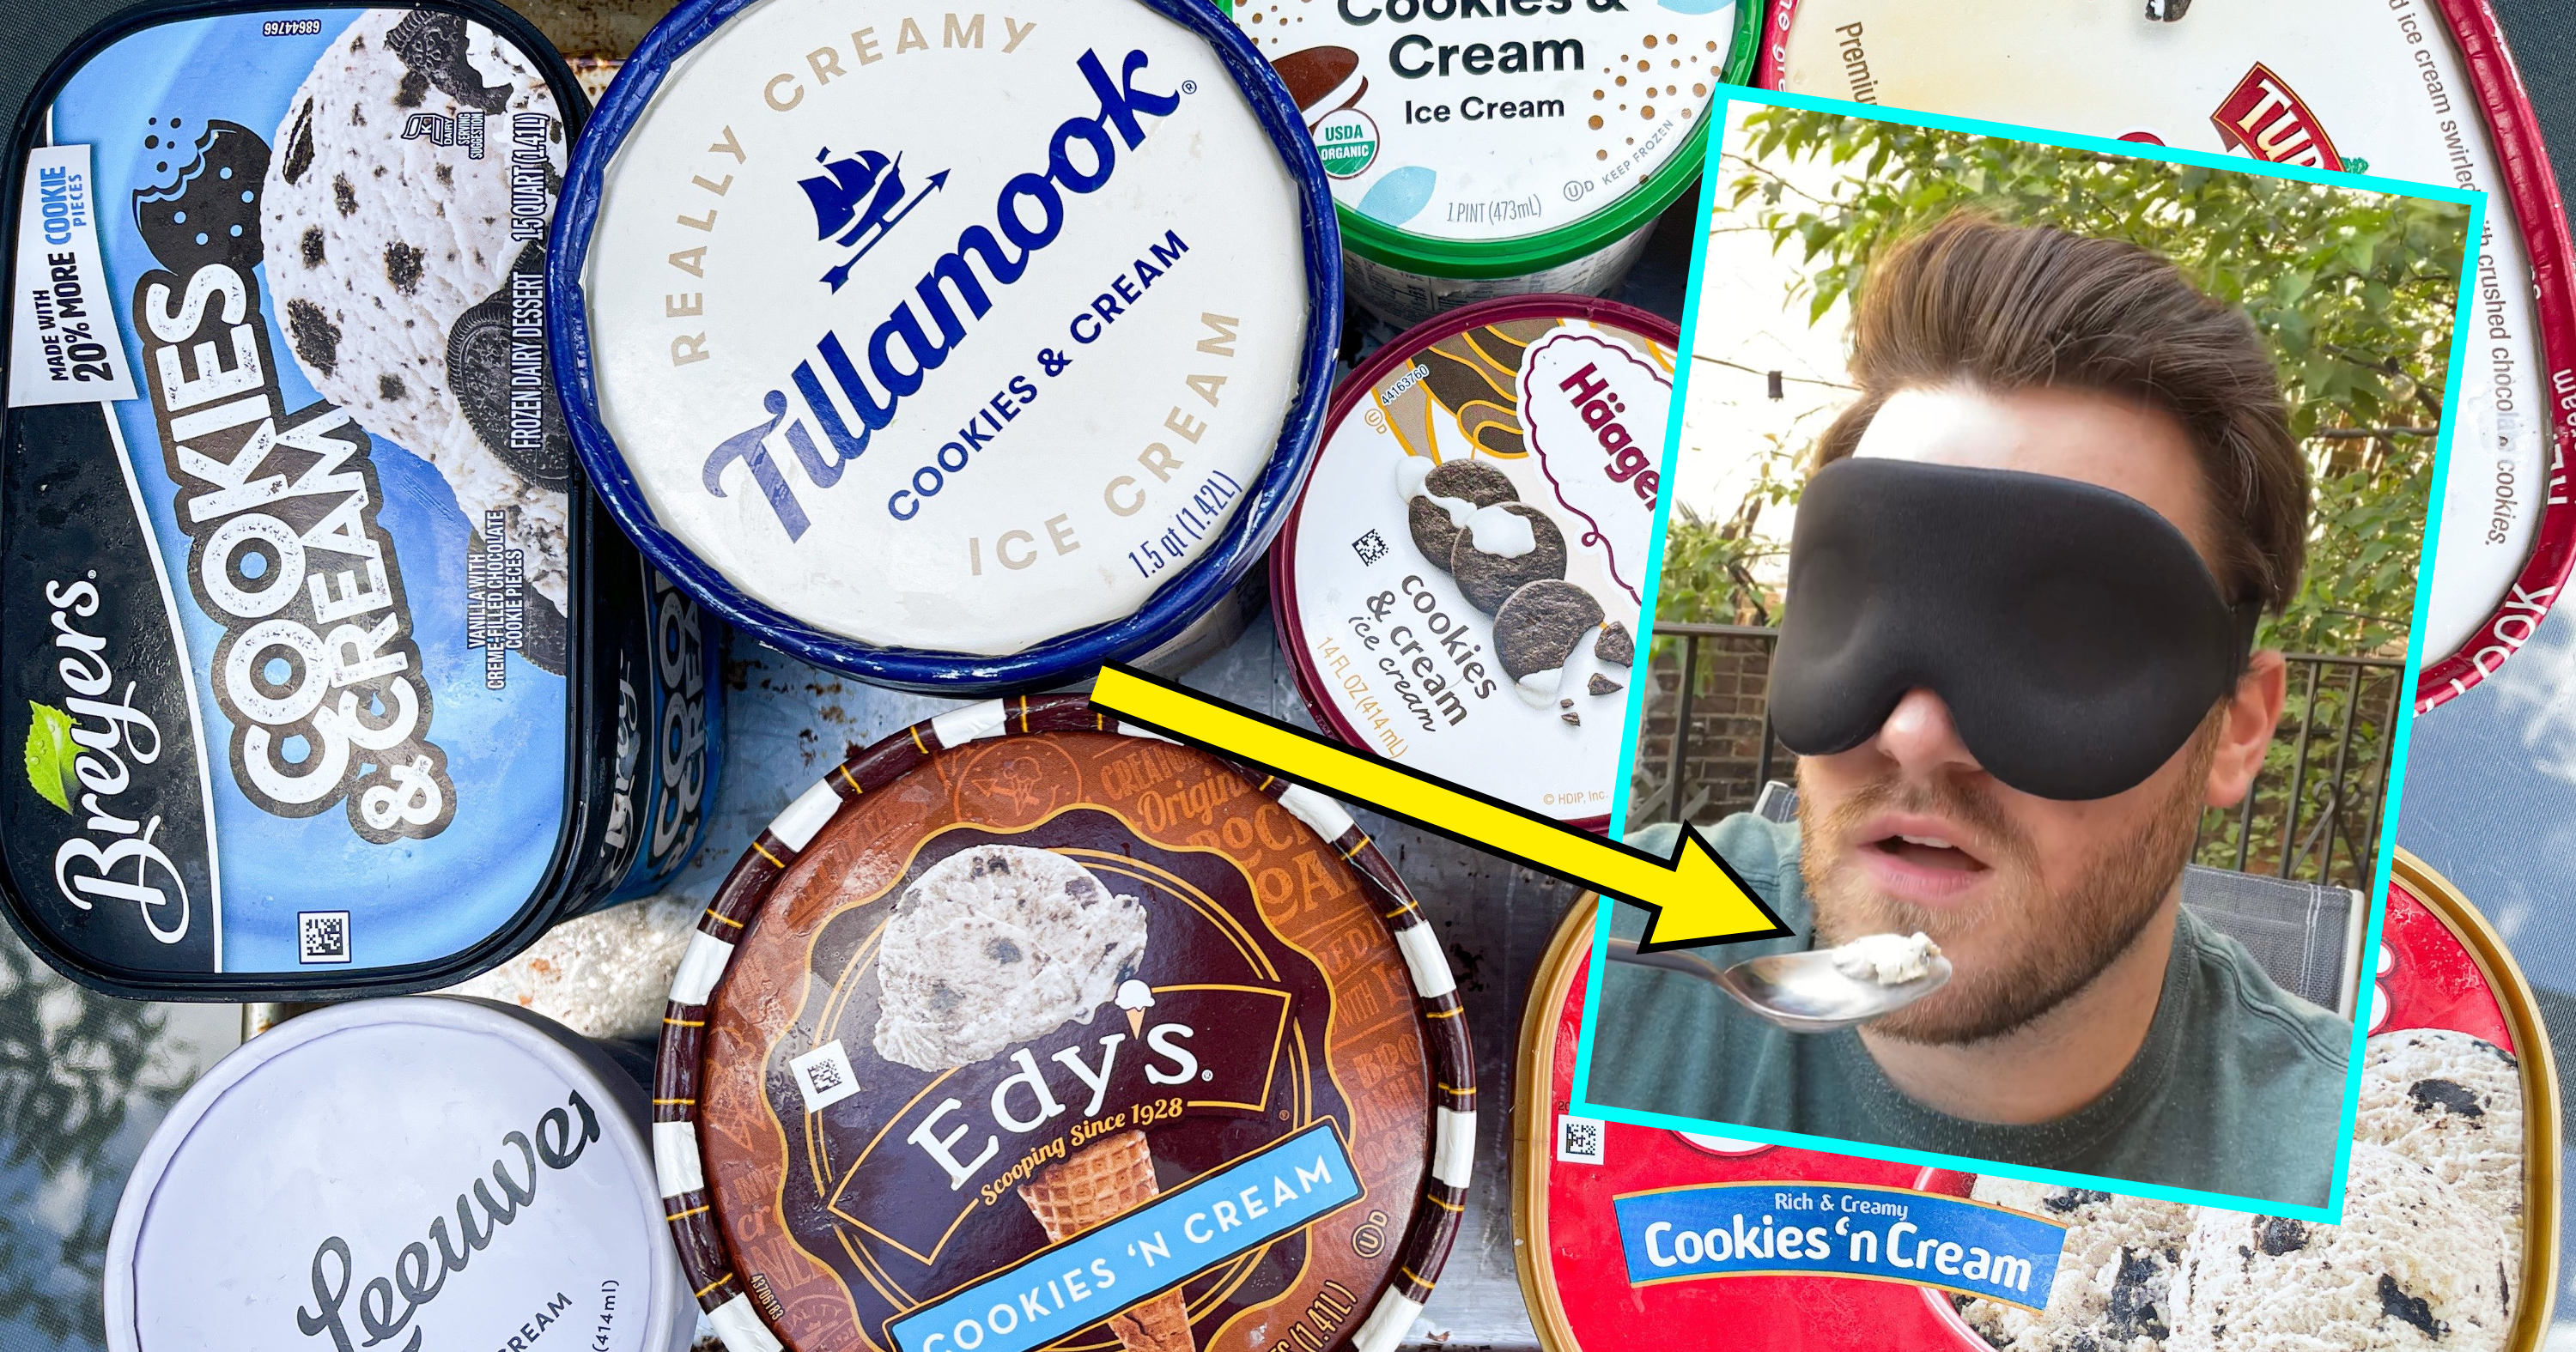 The 5 Best Ice Cream Scoops, According to Our Tests